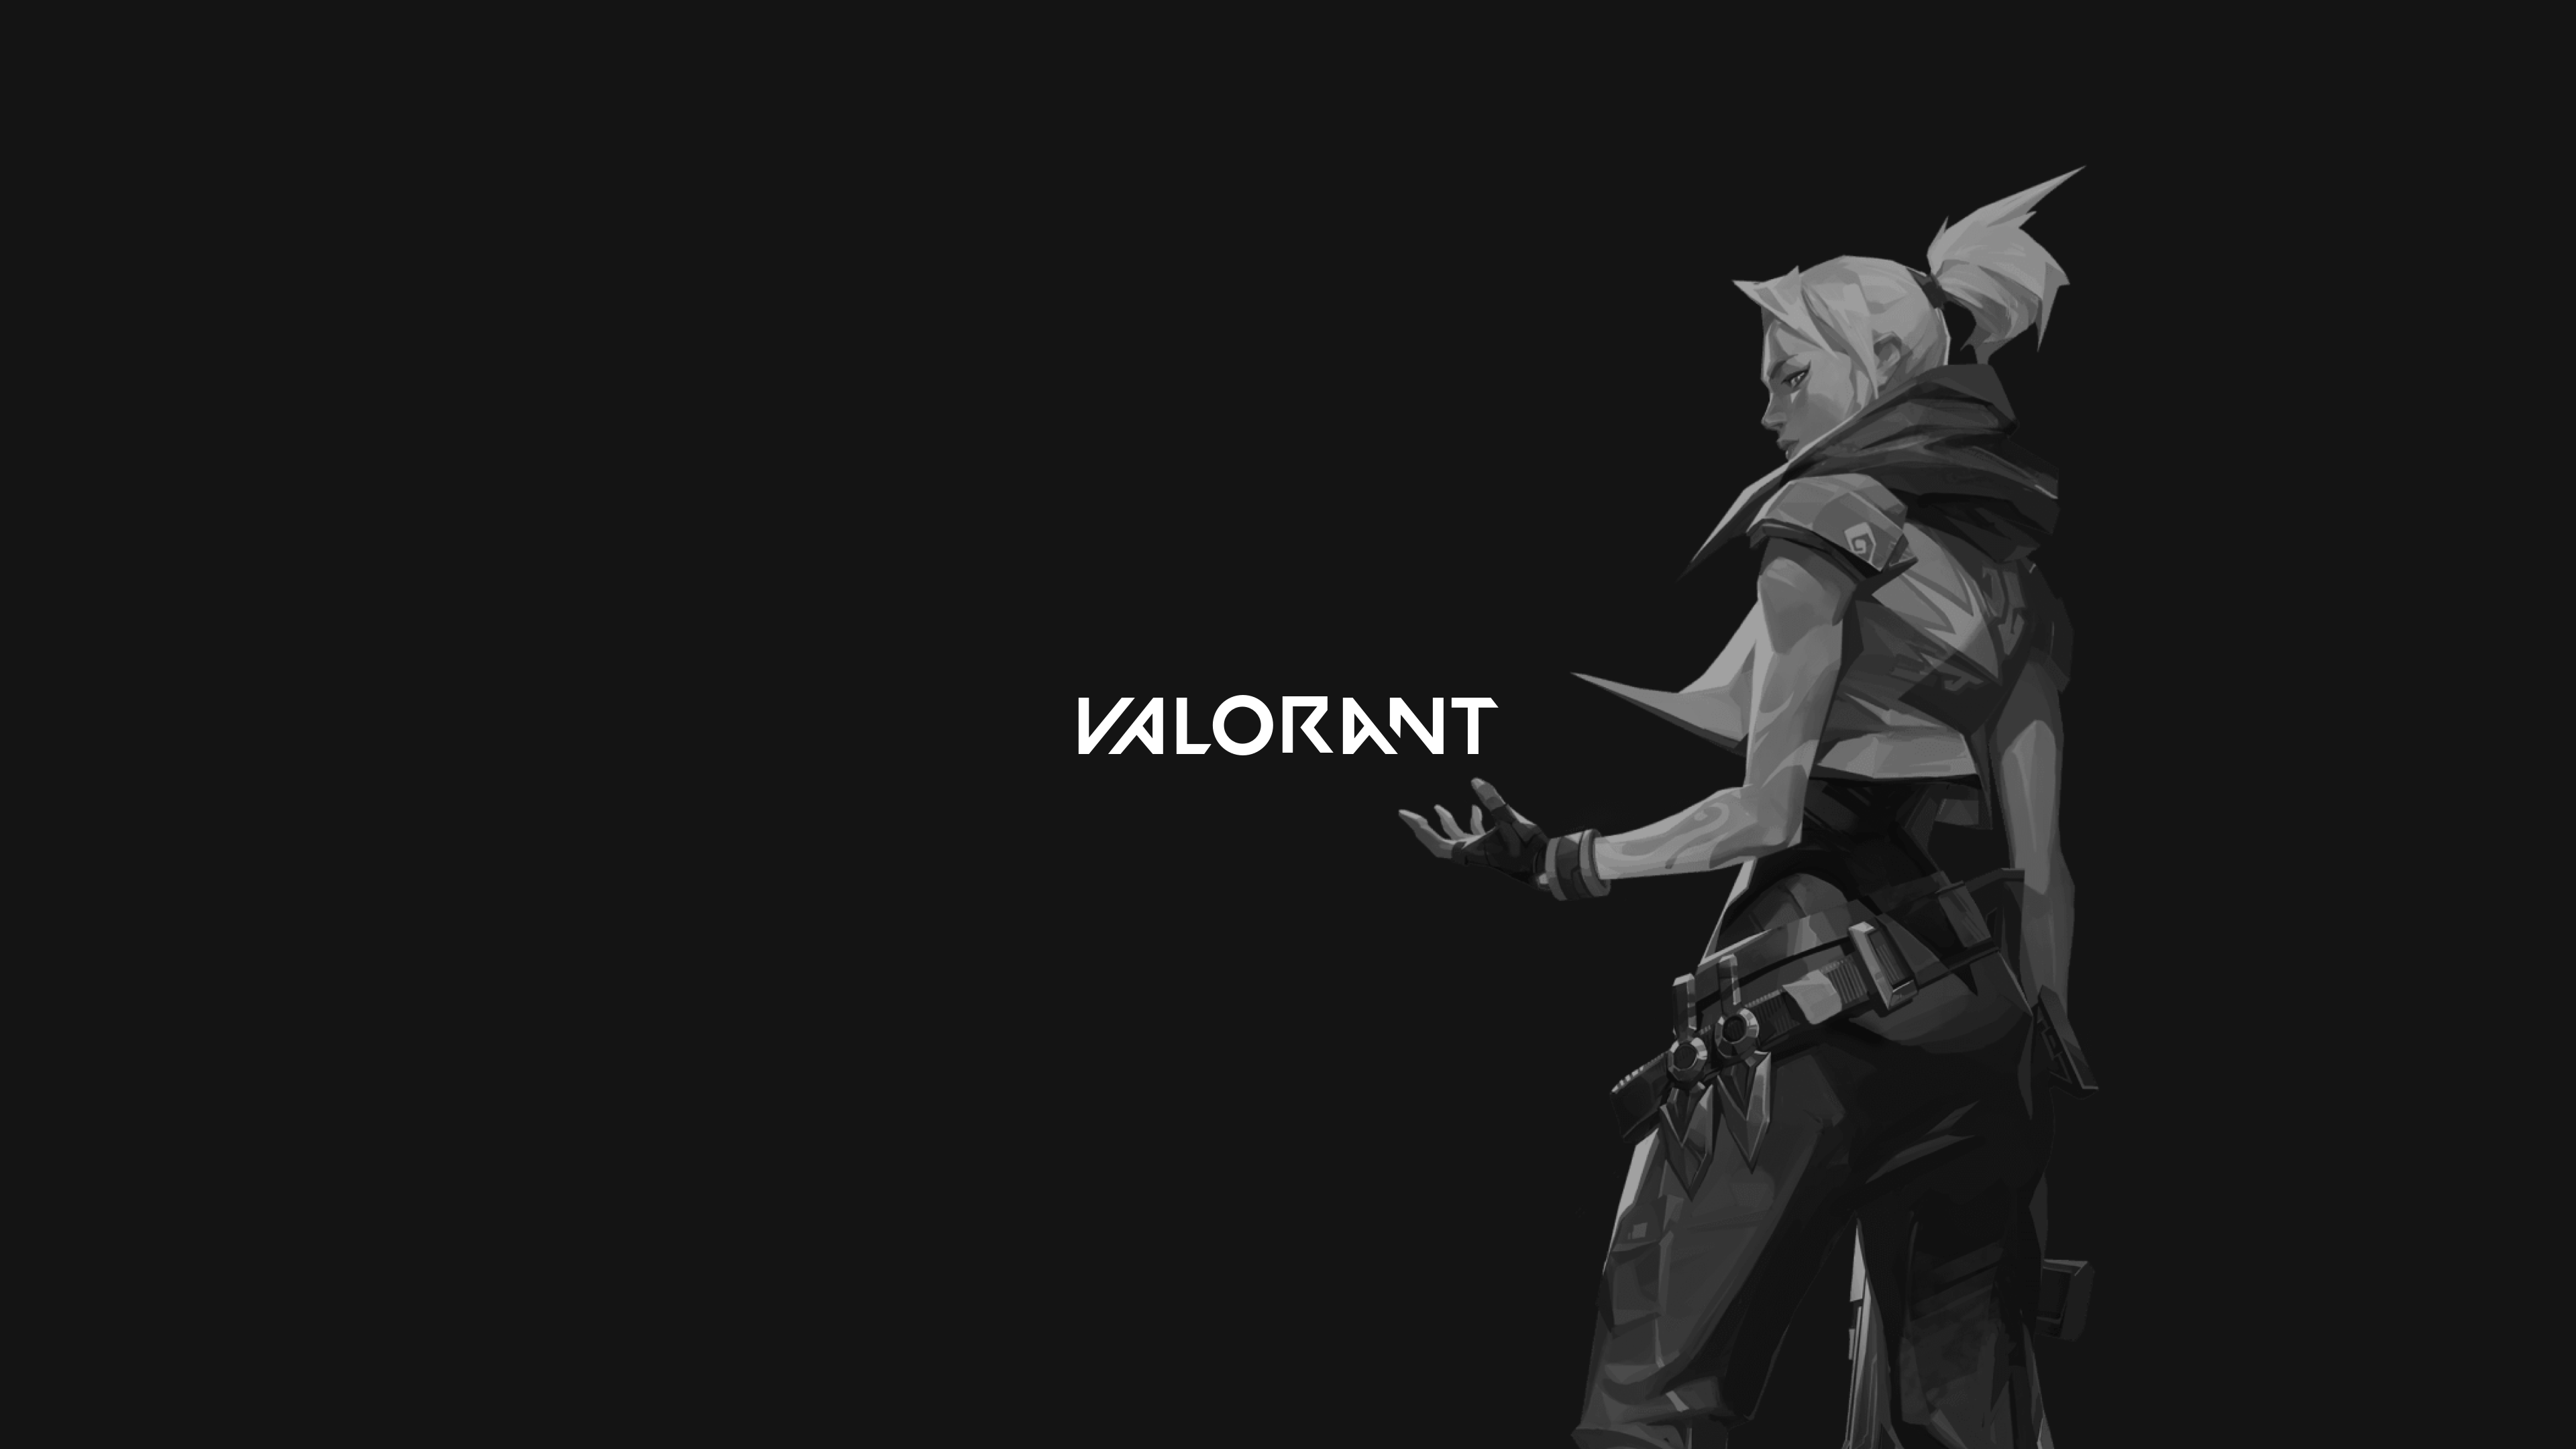 Minimal Valorant Wallpaper (Ultrawide & Text Only Versions In Comments)!